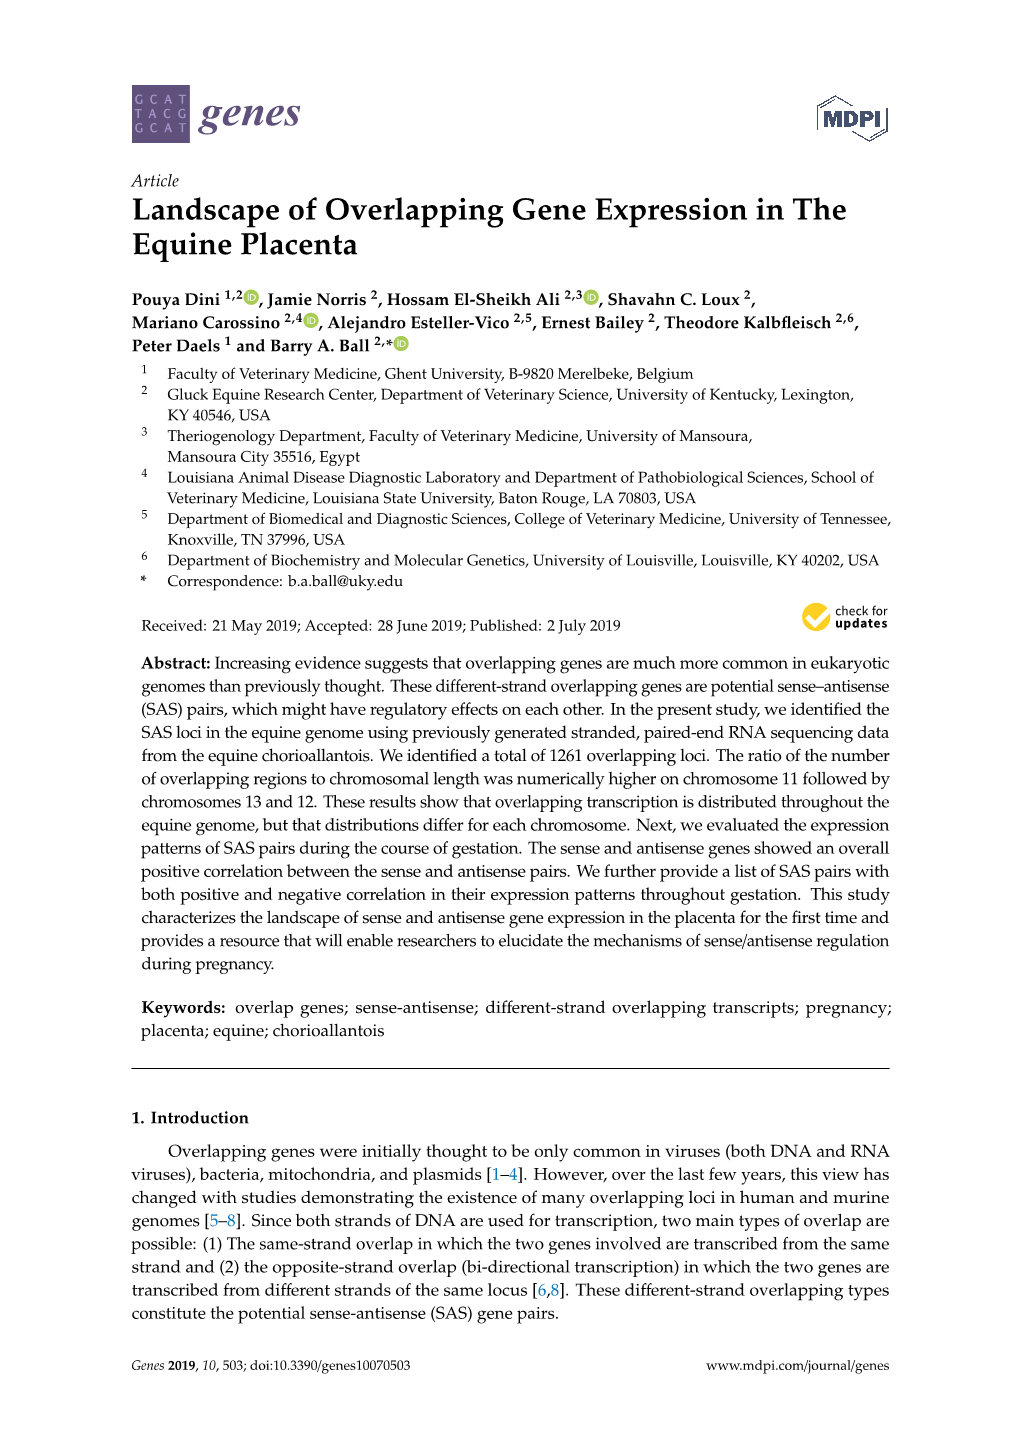 Landscape of Overlapping Gene Expression in the Equine Placenta